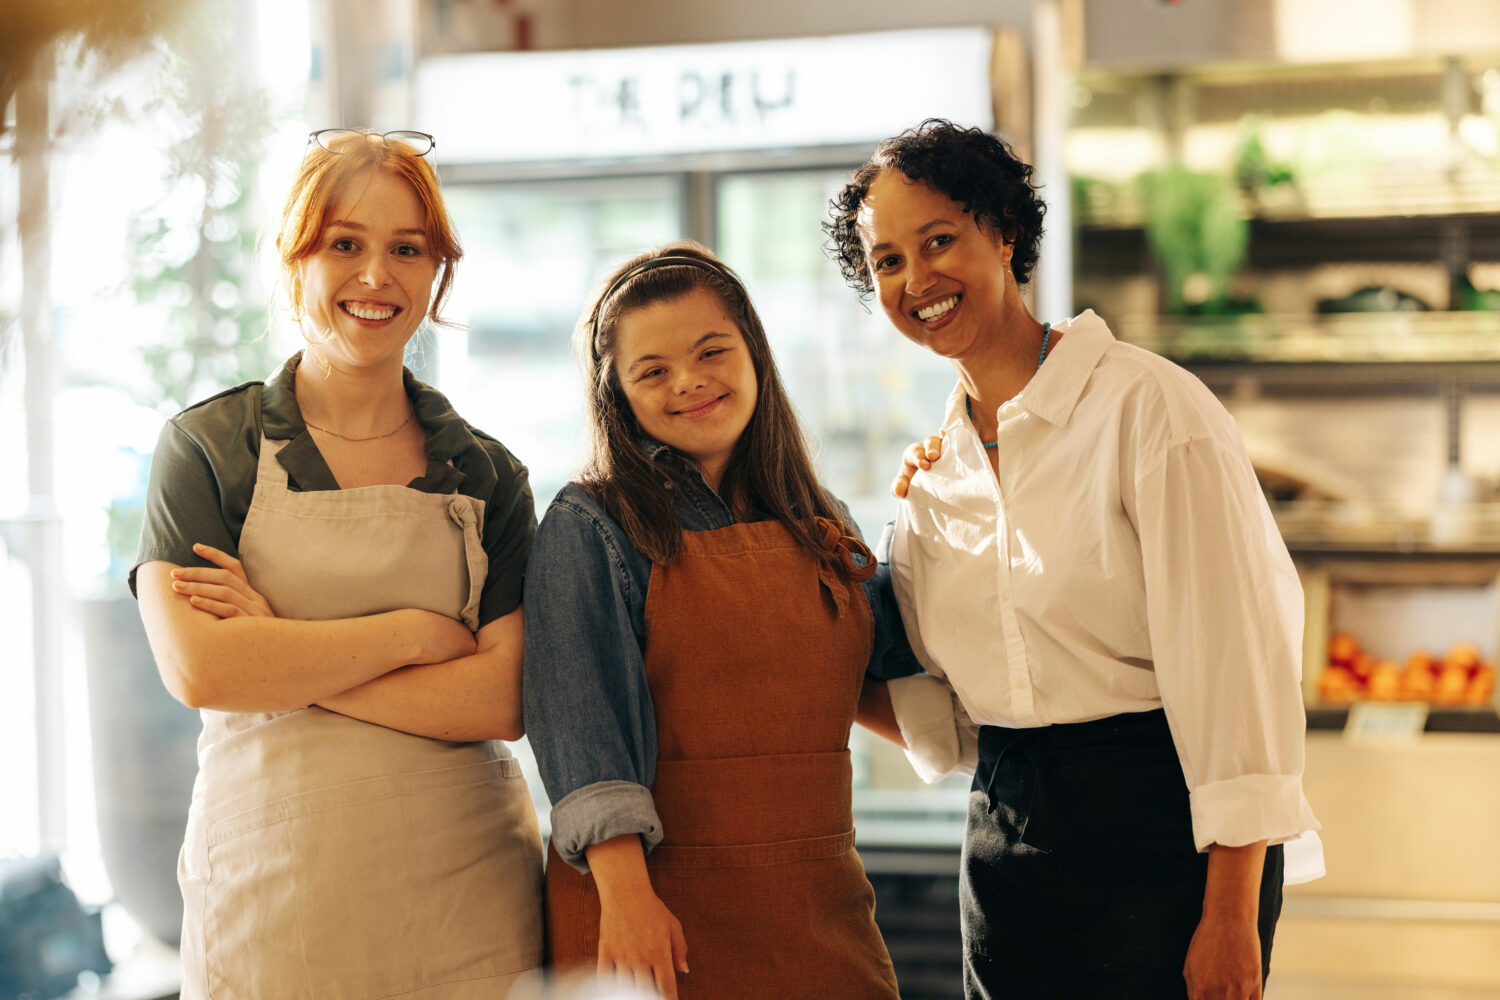 brown haired woman with down syndrome wearing denim shirt and brown apron, standing in grocery store with red headed white woman and black woman (co-workers)